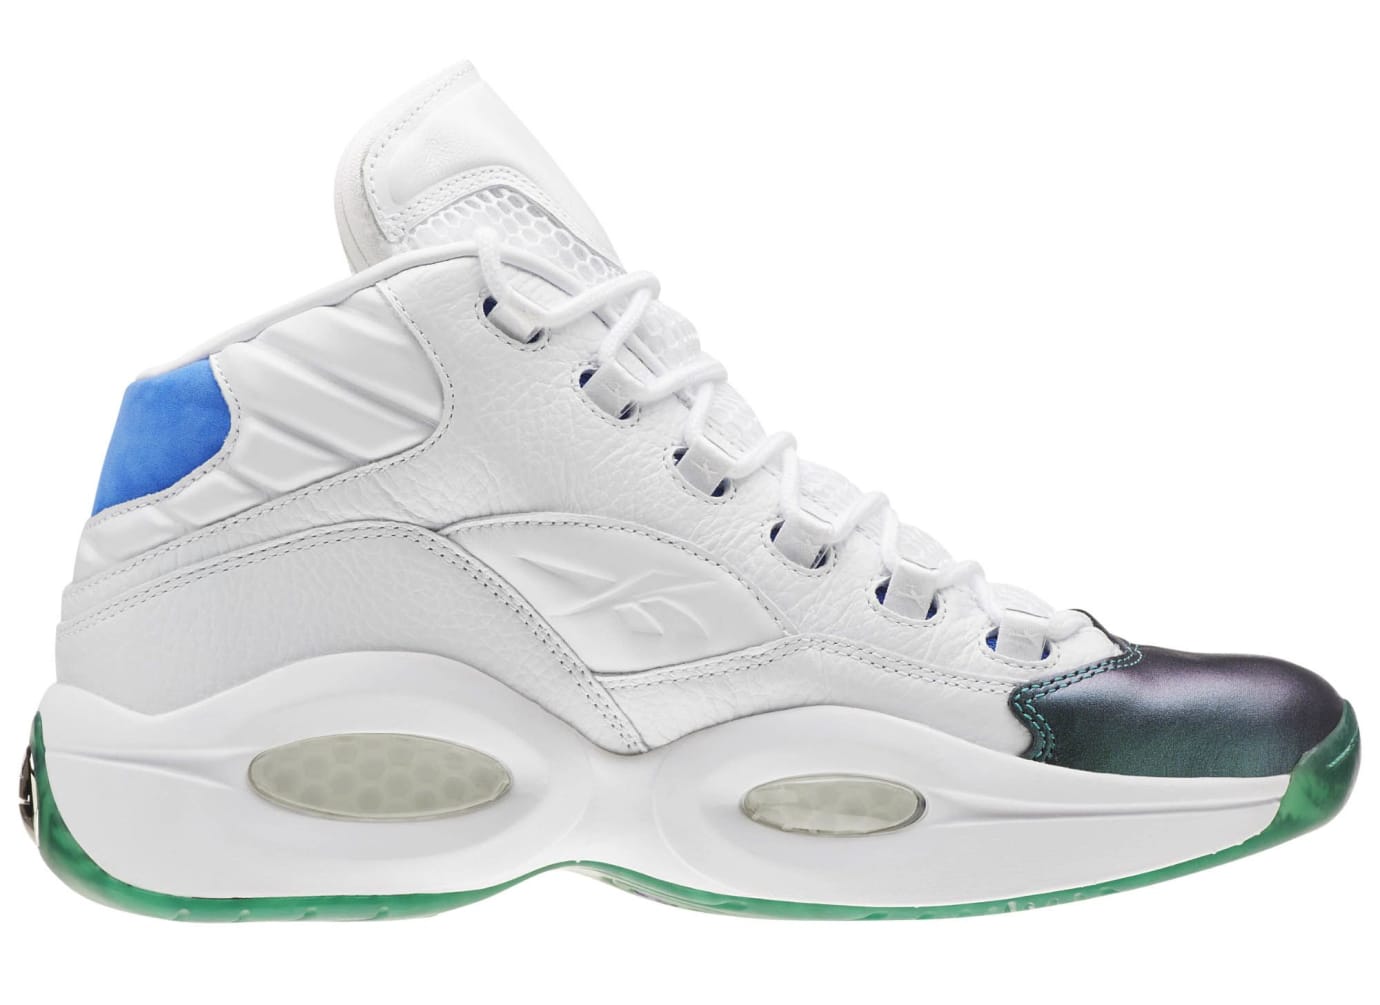 Currensy x Reebok Question Mid 'Jet Life' CN3671 (Lateral)